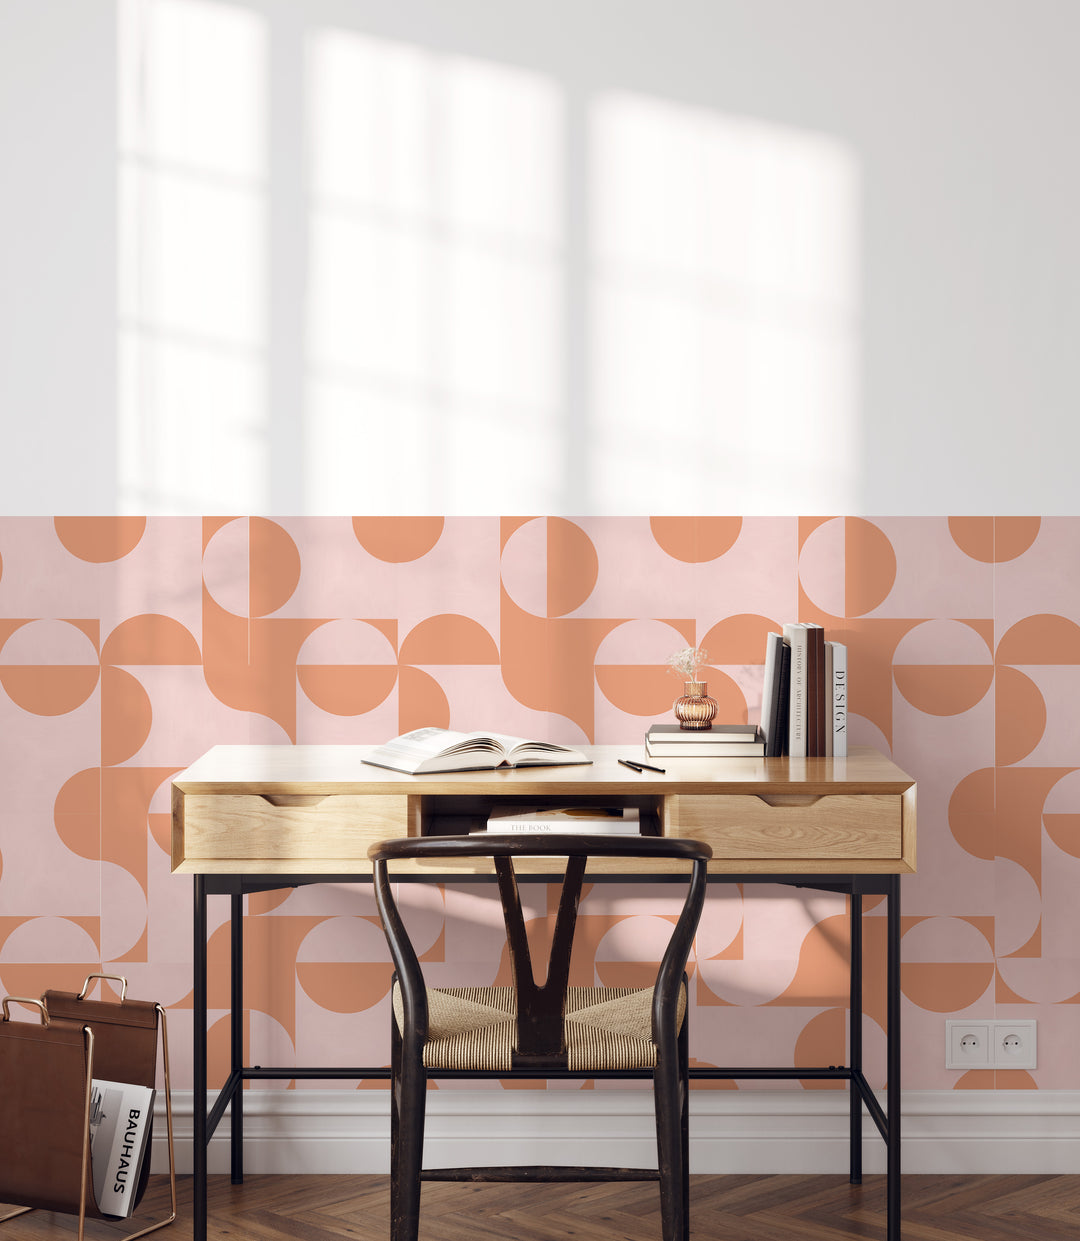 Retro Abstract Shapes Tile Decal Vinyl Stickers Pack